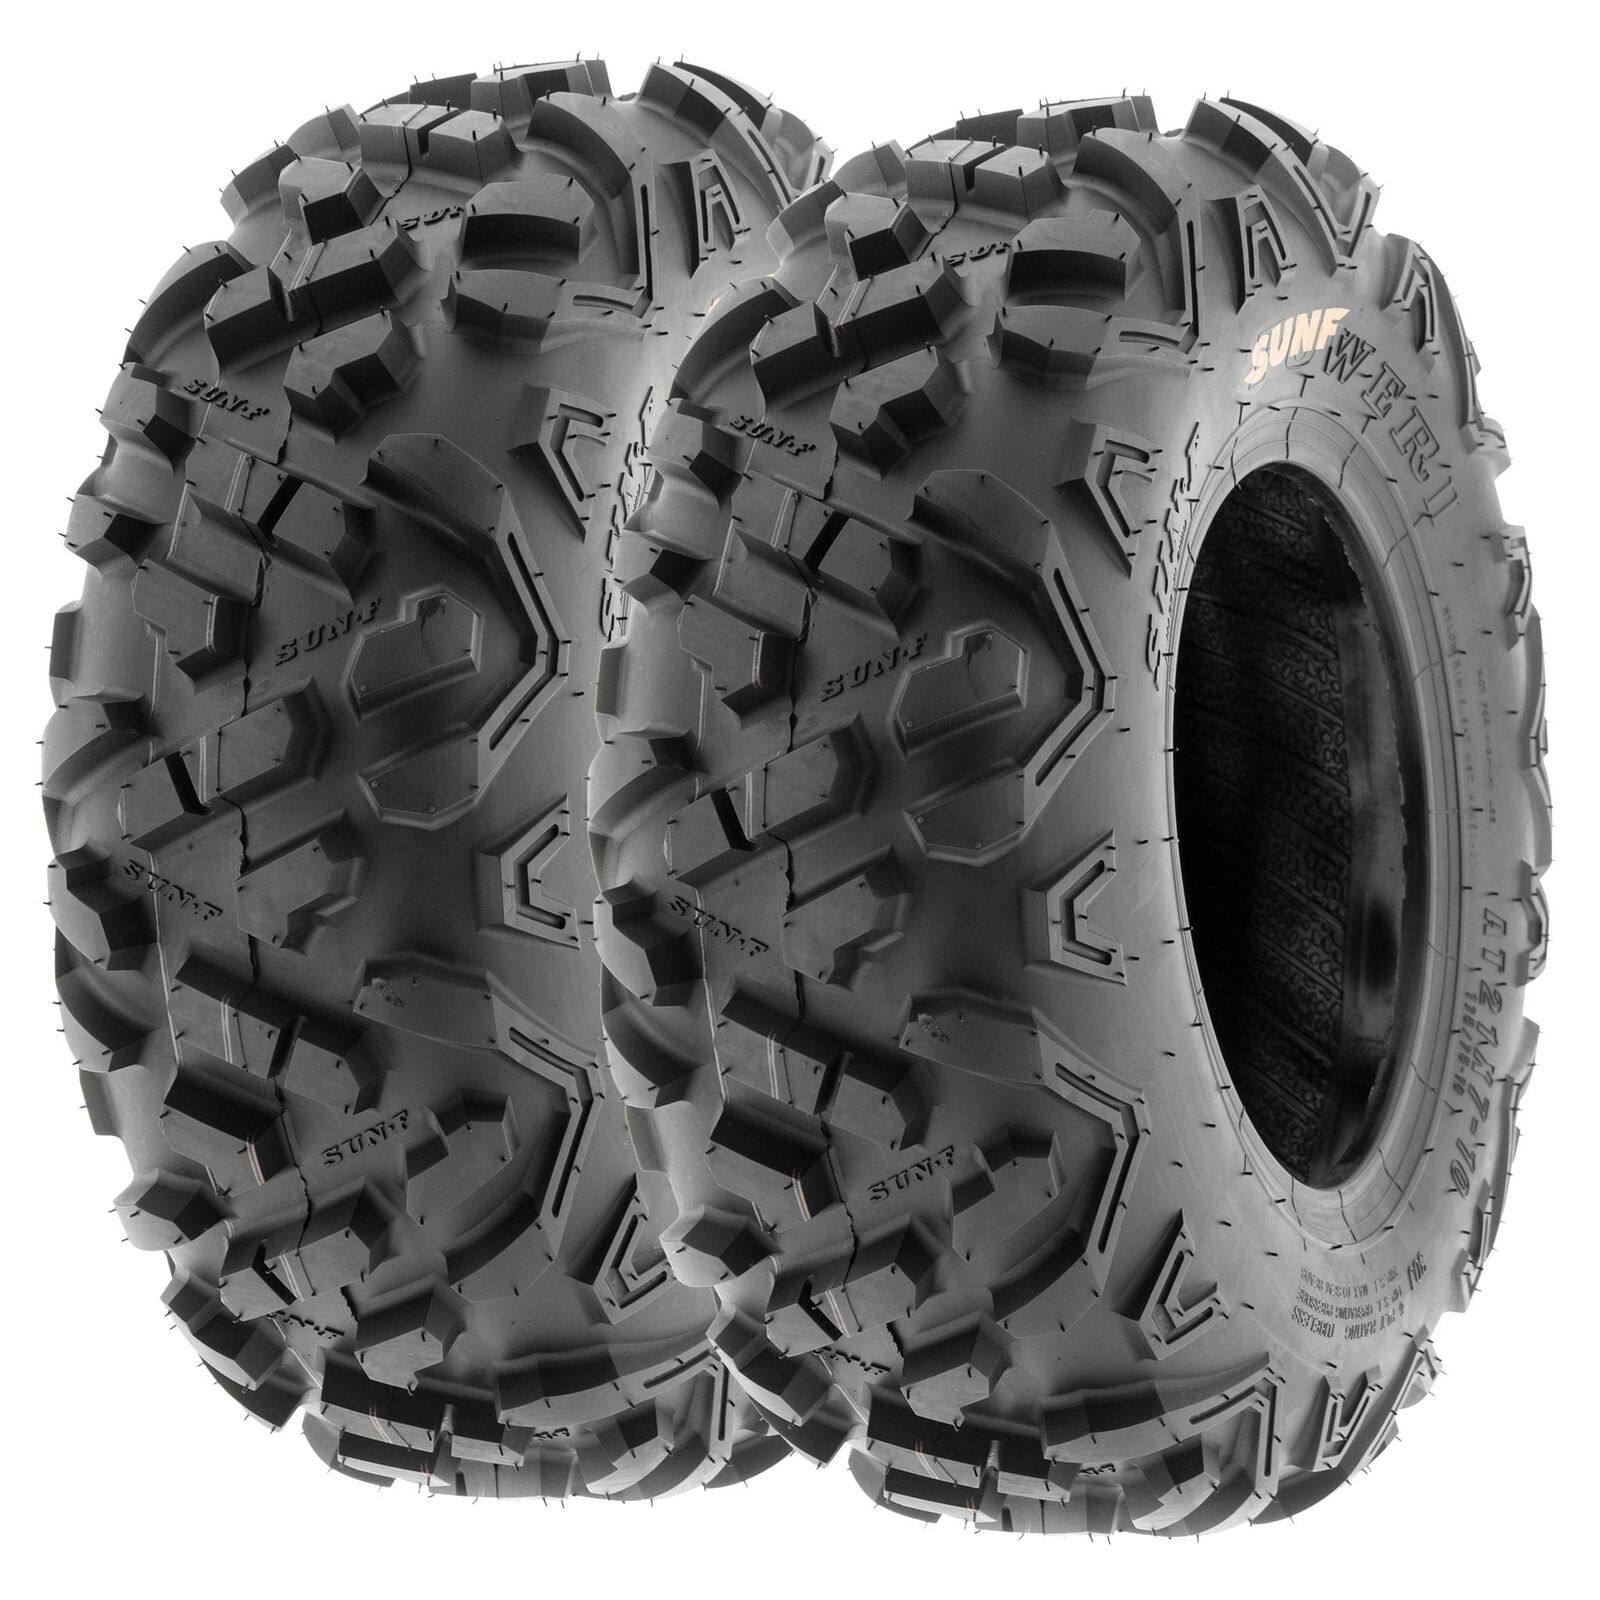 Pair of 2, 145/70-6 145/70x6 Quad ATV All Terrain AT 6 Ply Tires A051 by SunF